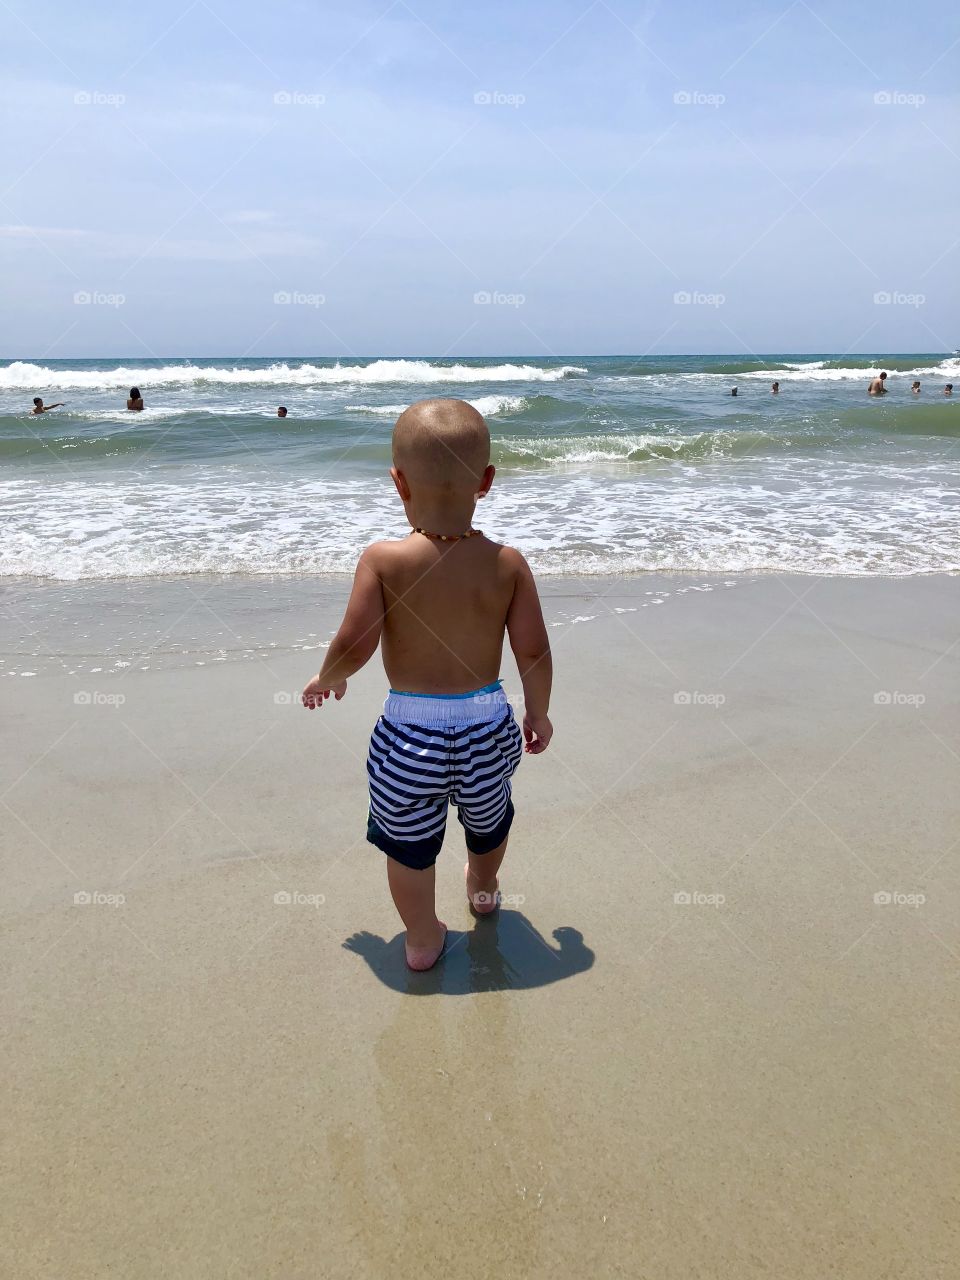 Toddler studying the ocean waves